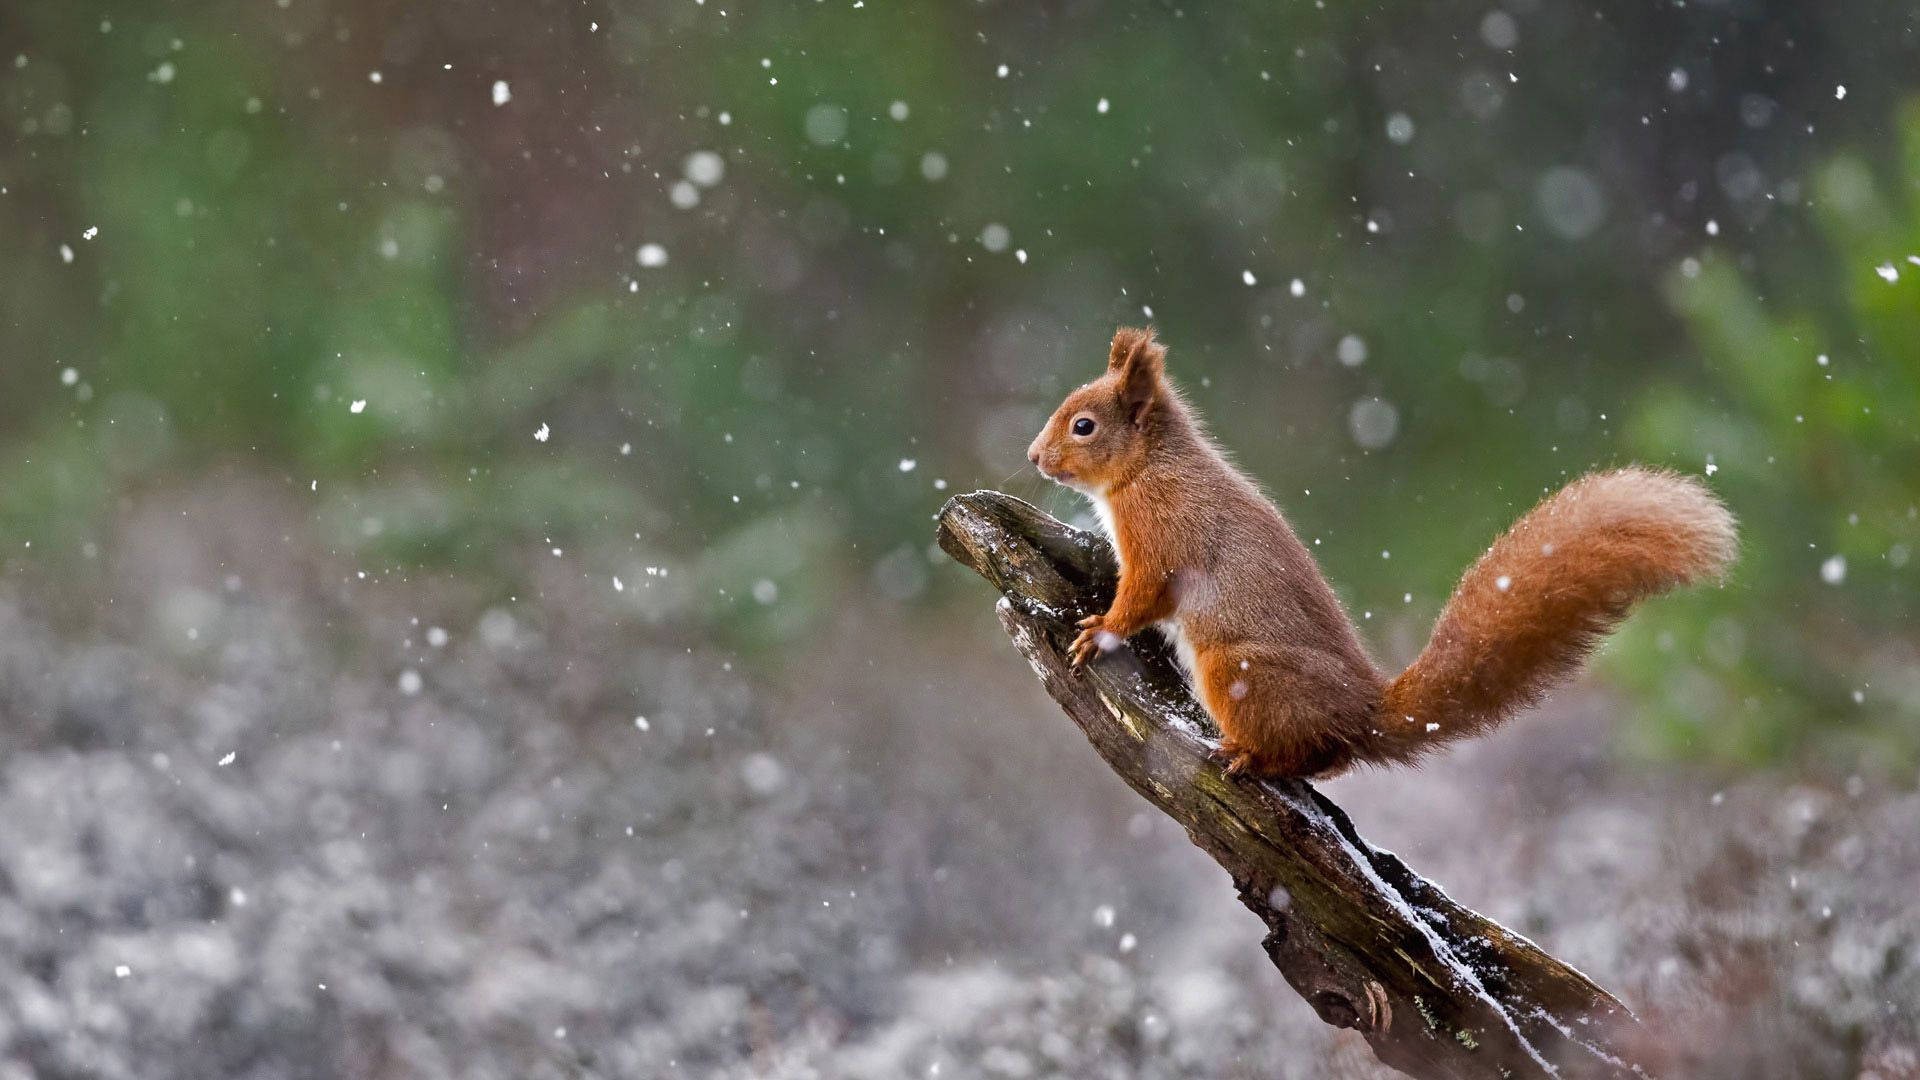 Adorable Squirrel Sitting On Tree Branch Wallpaper